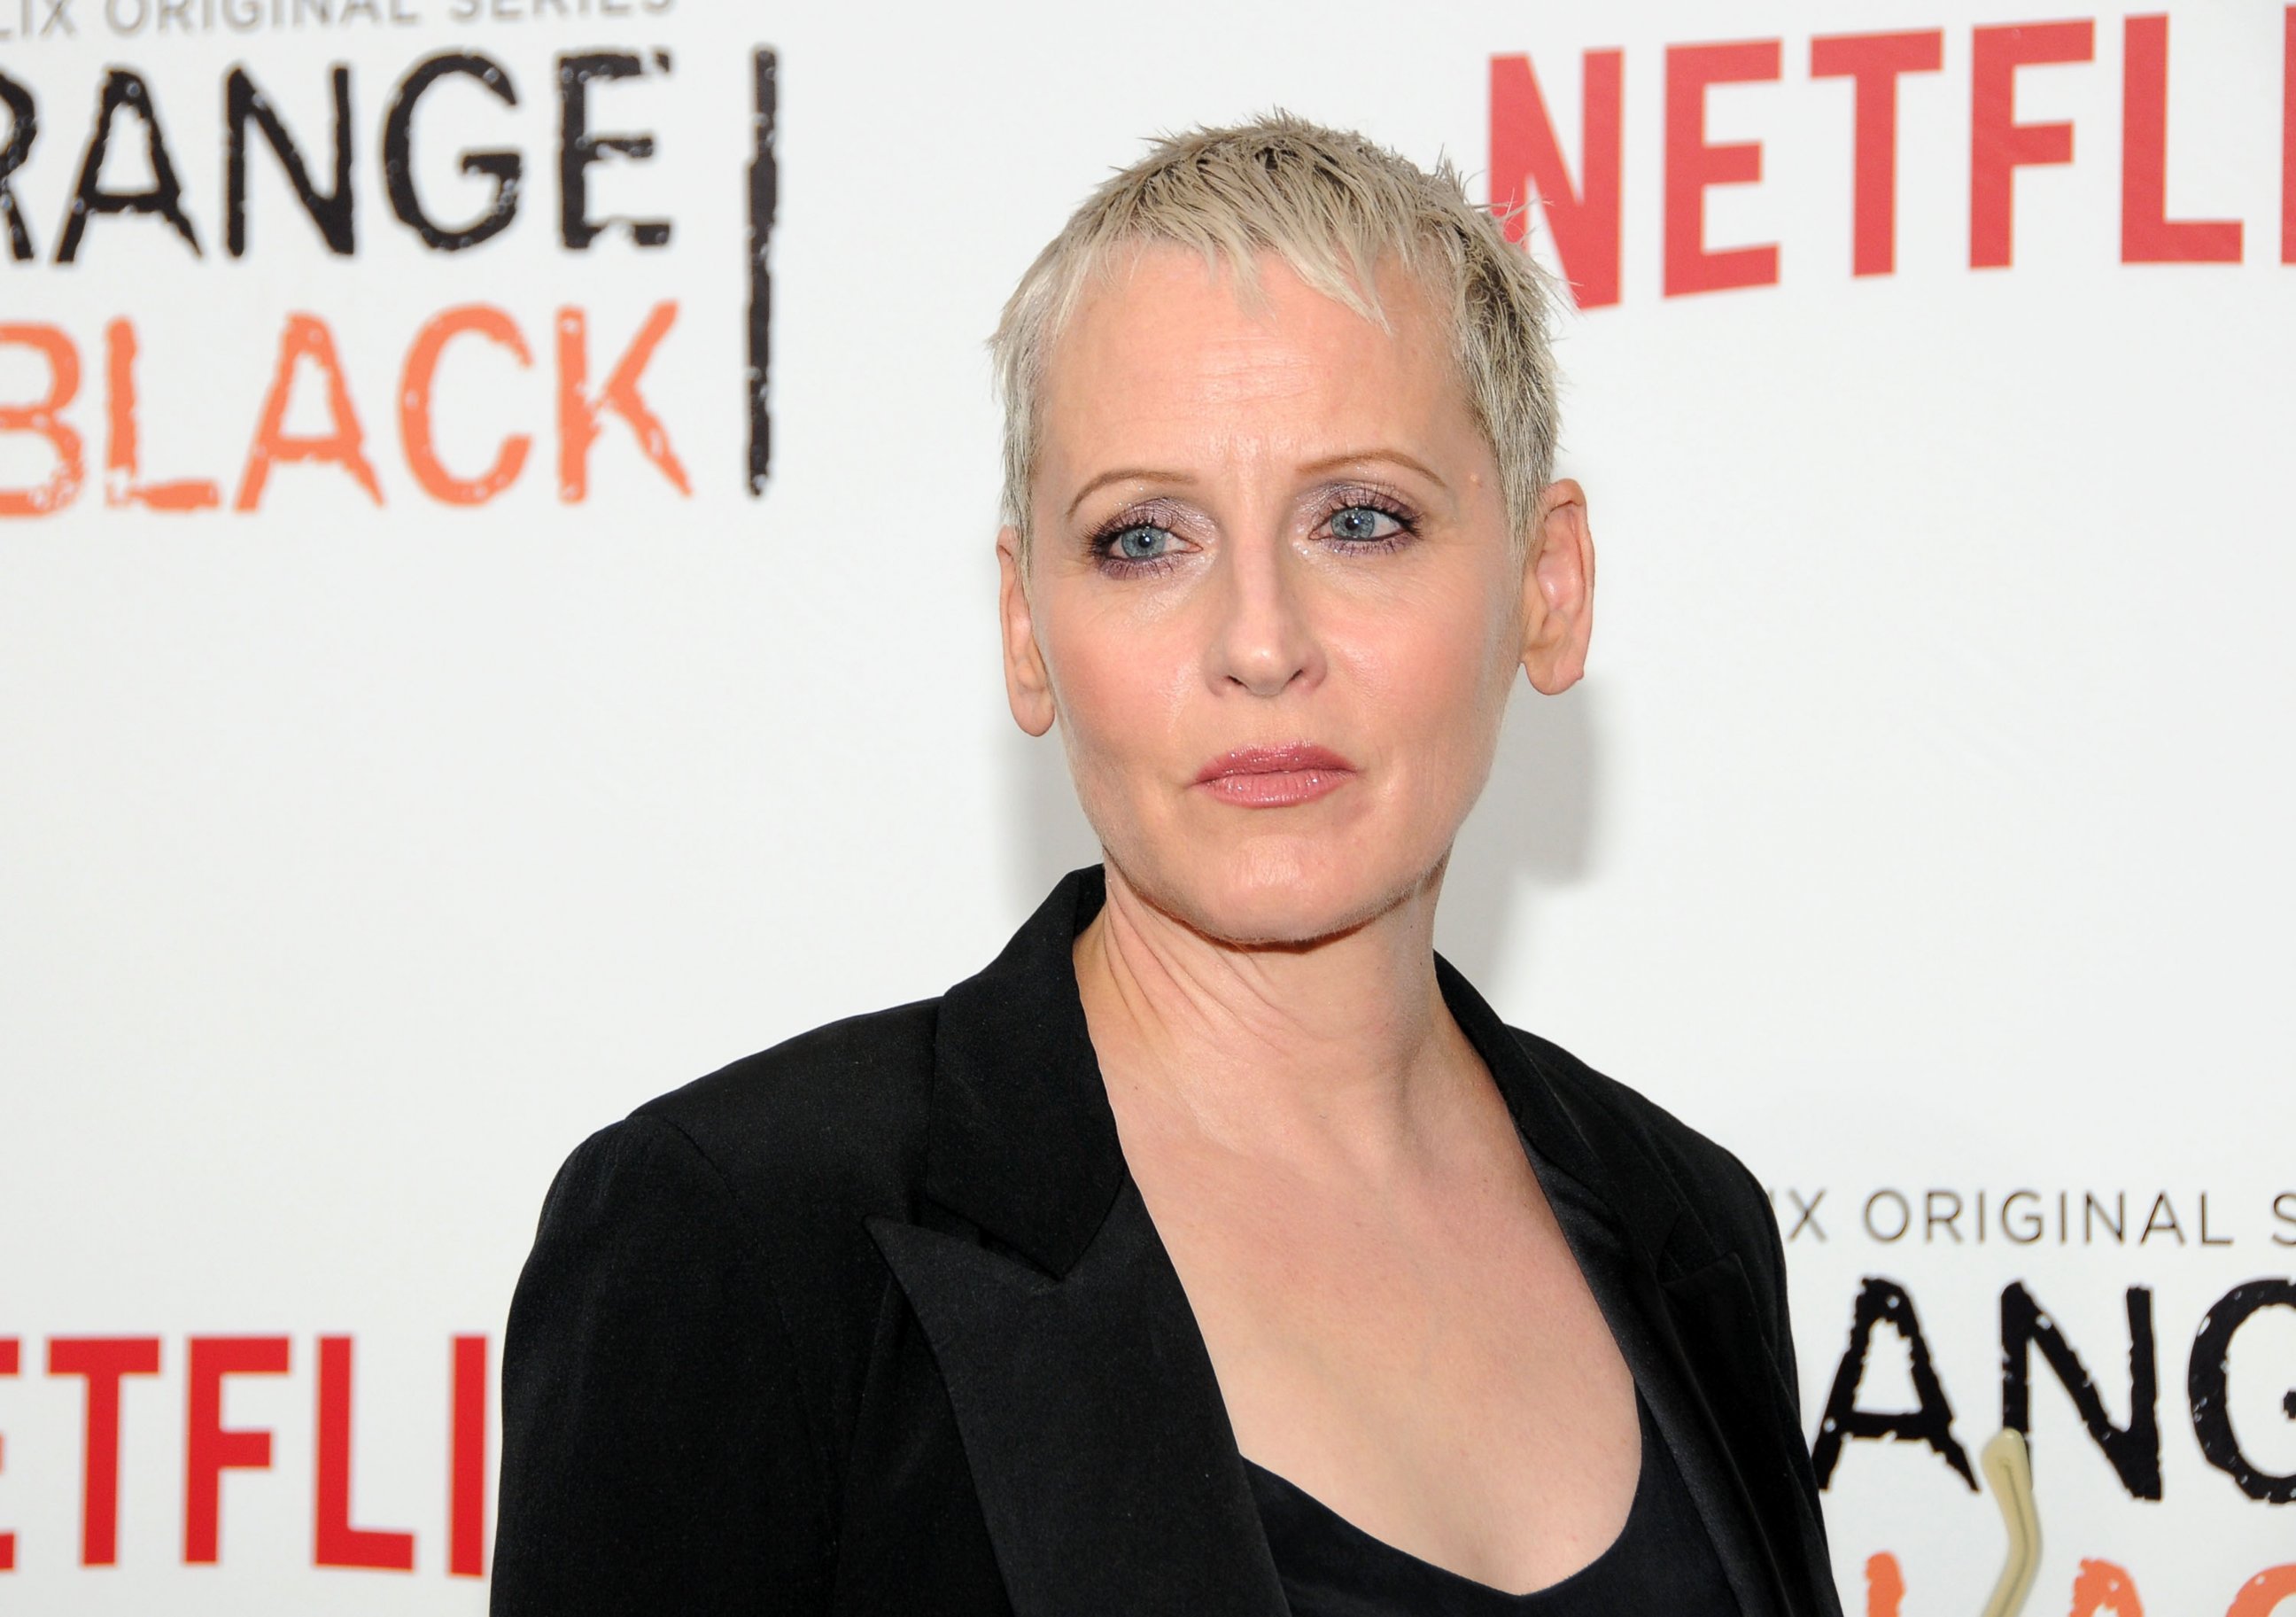 PHOTO: Actress Lori Petty attends the "Orange Is The New Black" season two premiere at Ziegfeld Theater on May 15, 2014 in New York City.